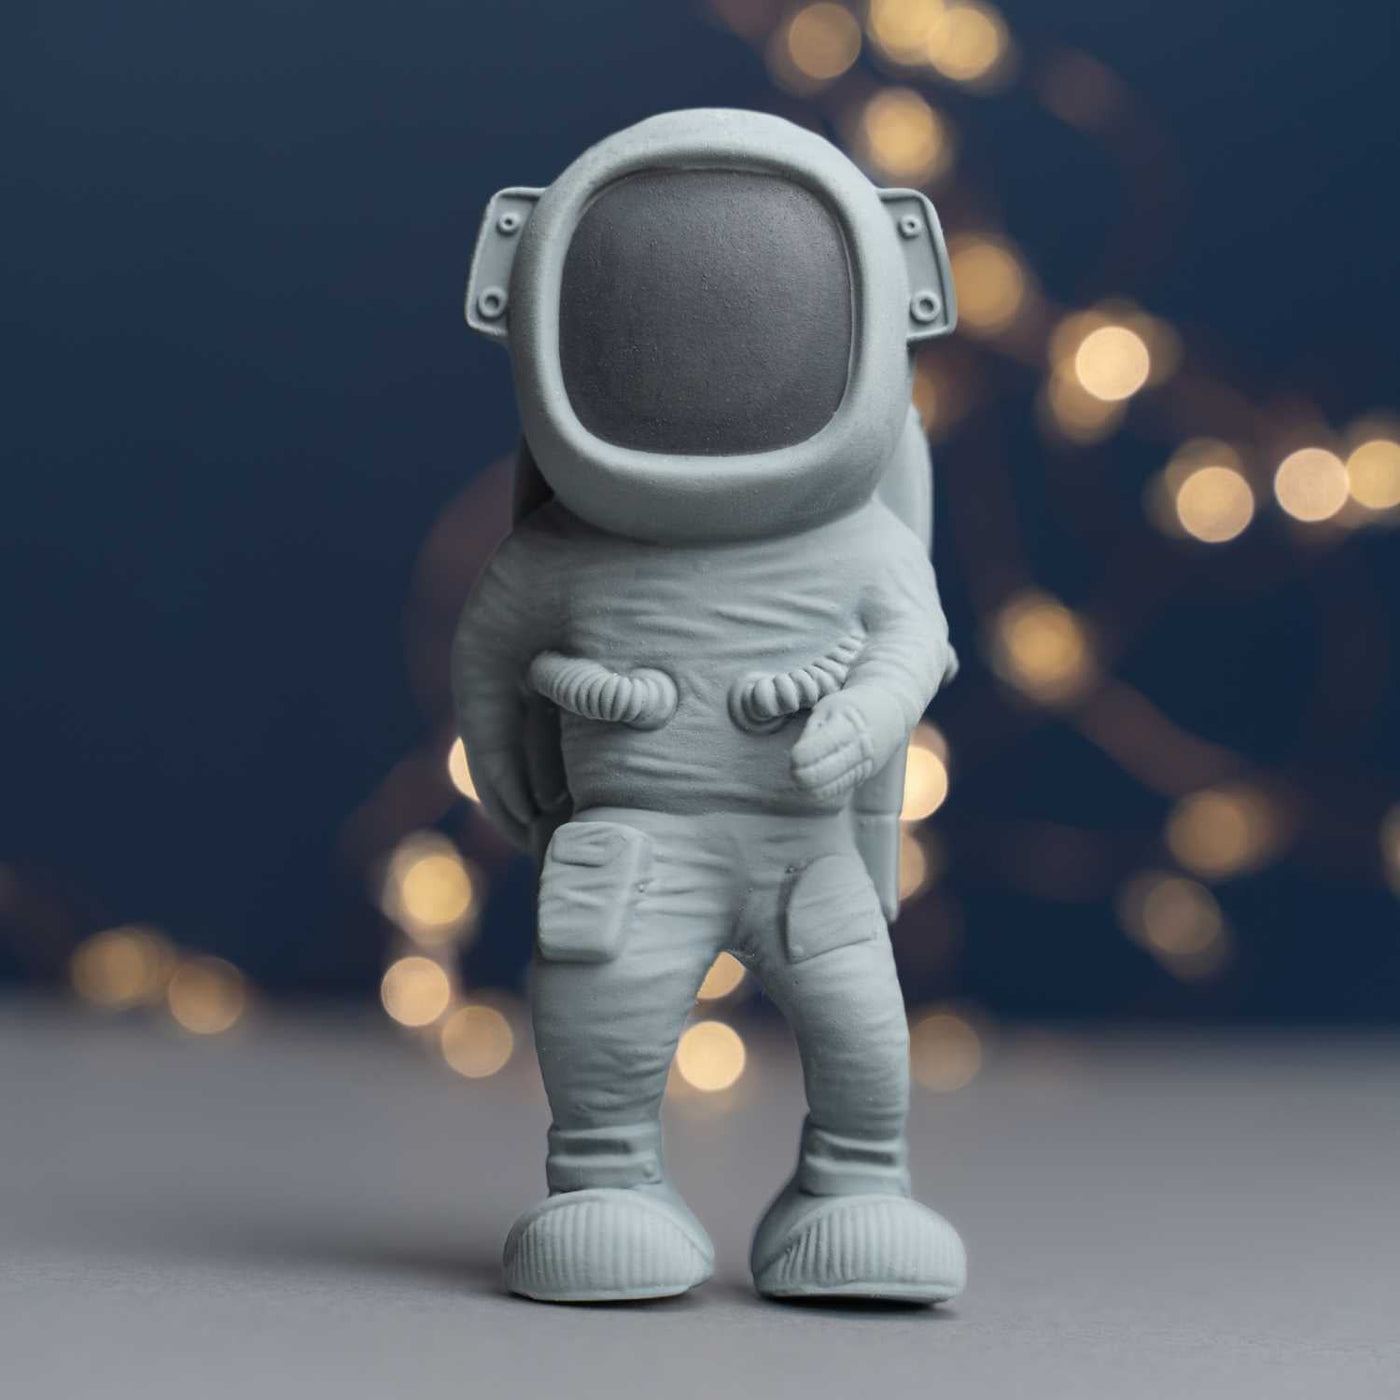 AstroGNAW Space Toy standing up by Thumble Baby Care